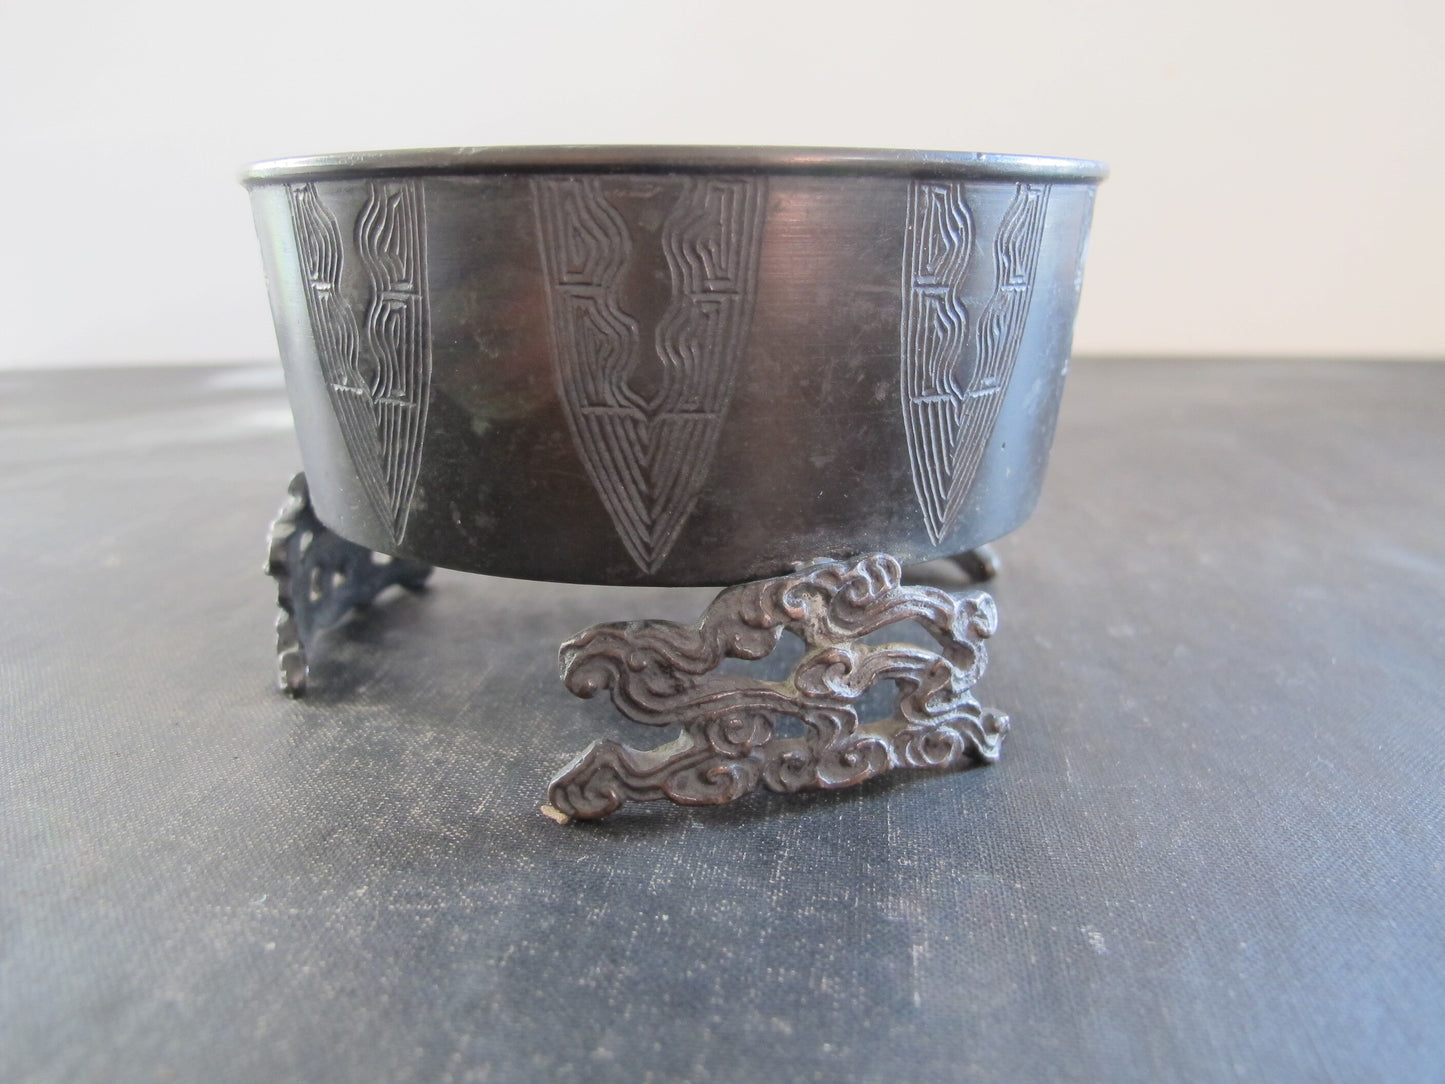 Chinese Antique Bronze Bowl Signed Marked Honorific Archaic Style Tripod Cloud Form Feet c. 1920